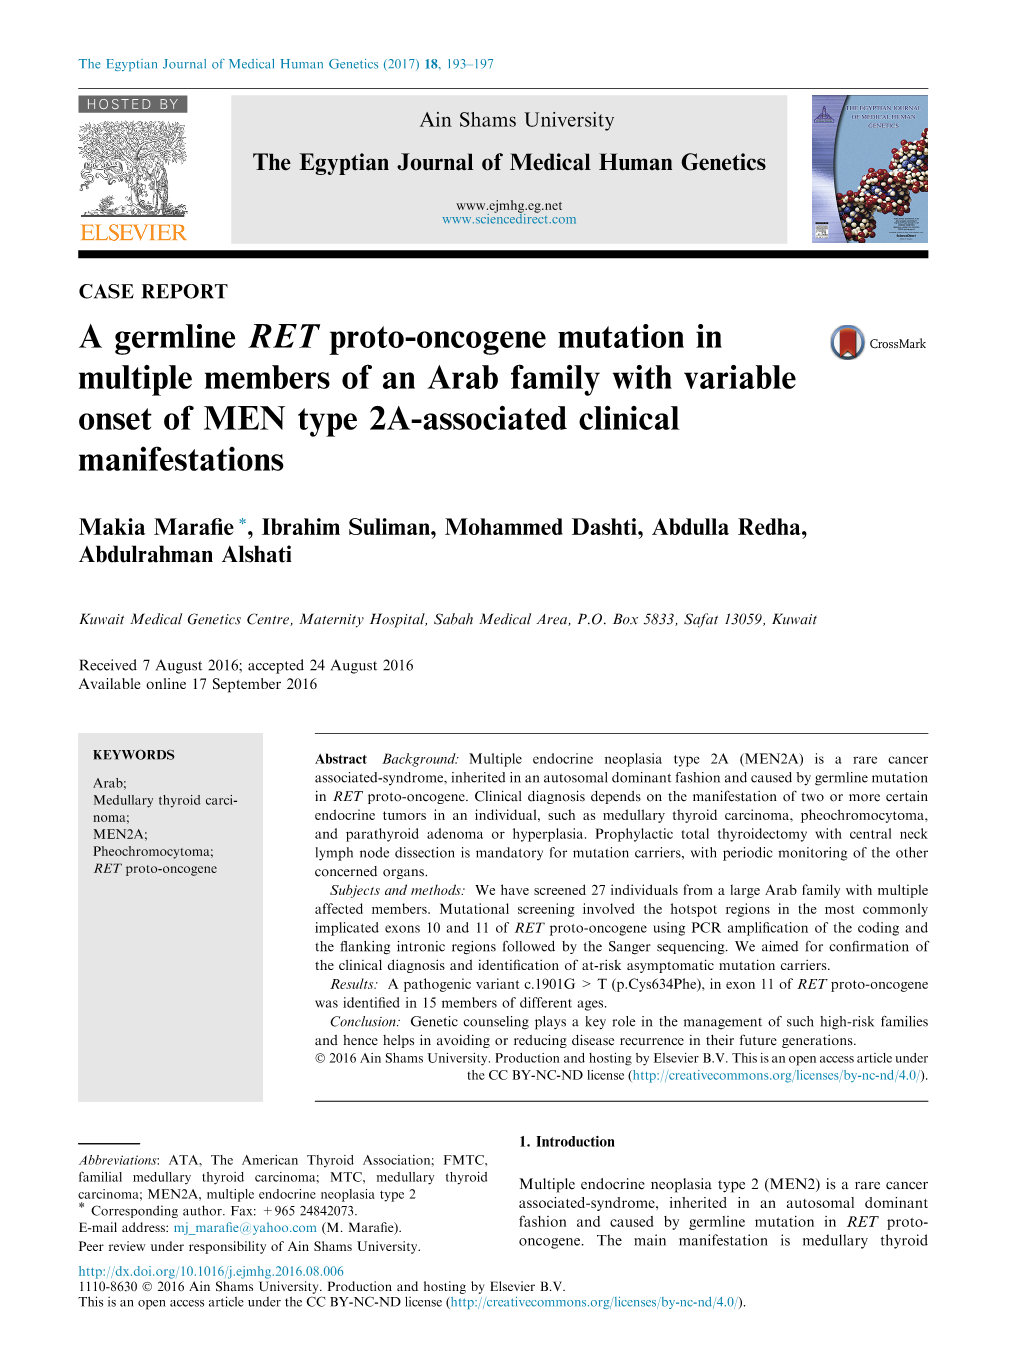 A Germline RET Proto-Oncogene Mutation in Multiple Members of an Arab Family with Variable Onset of MEN Type 2A-Associated Clinical Manifestations